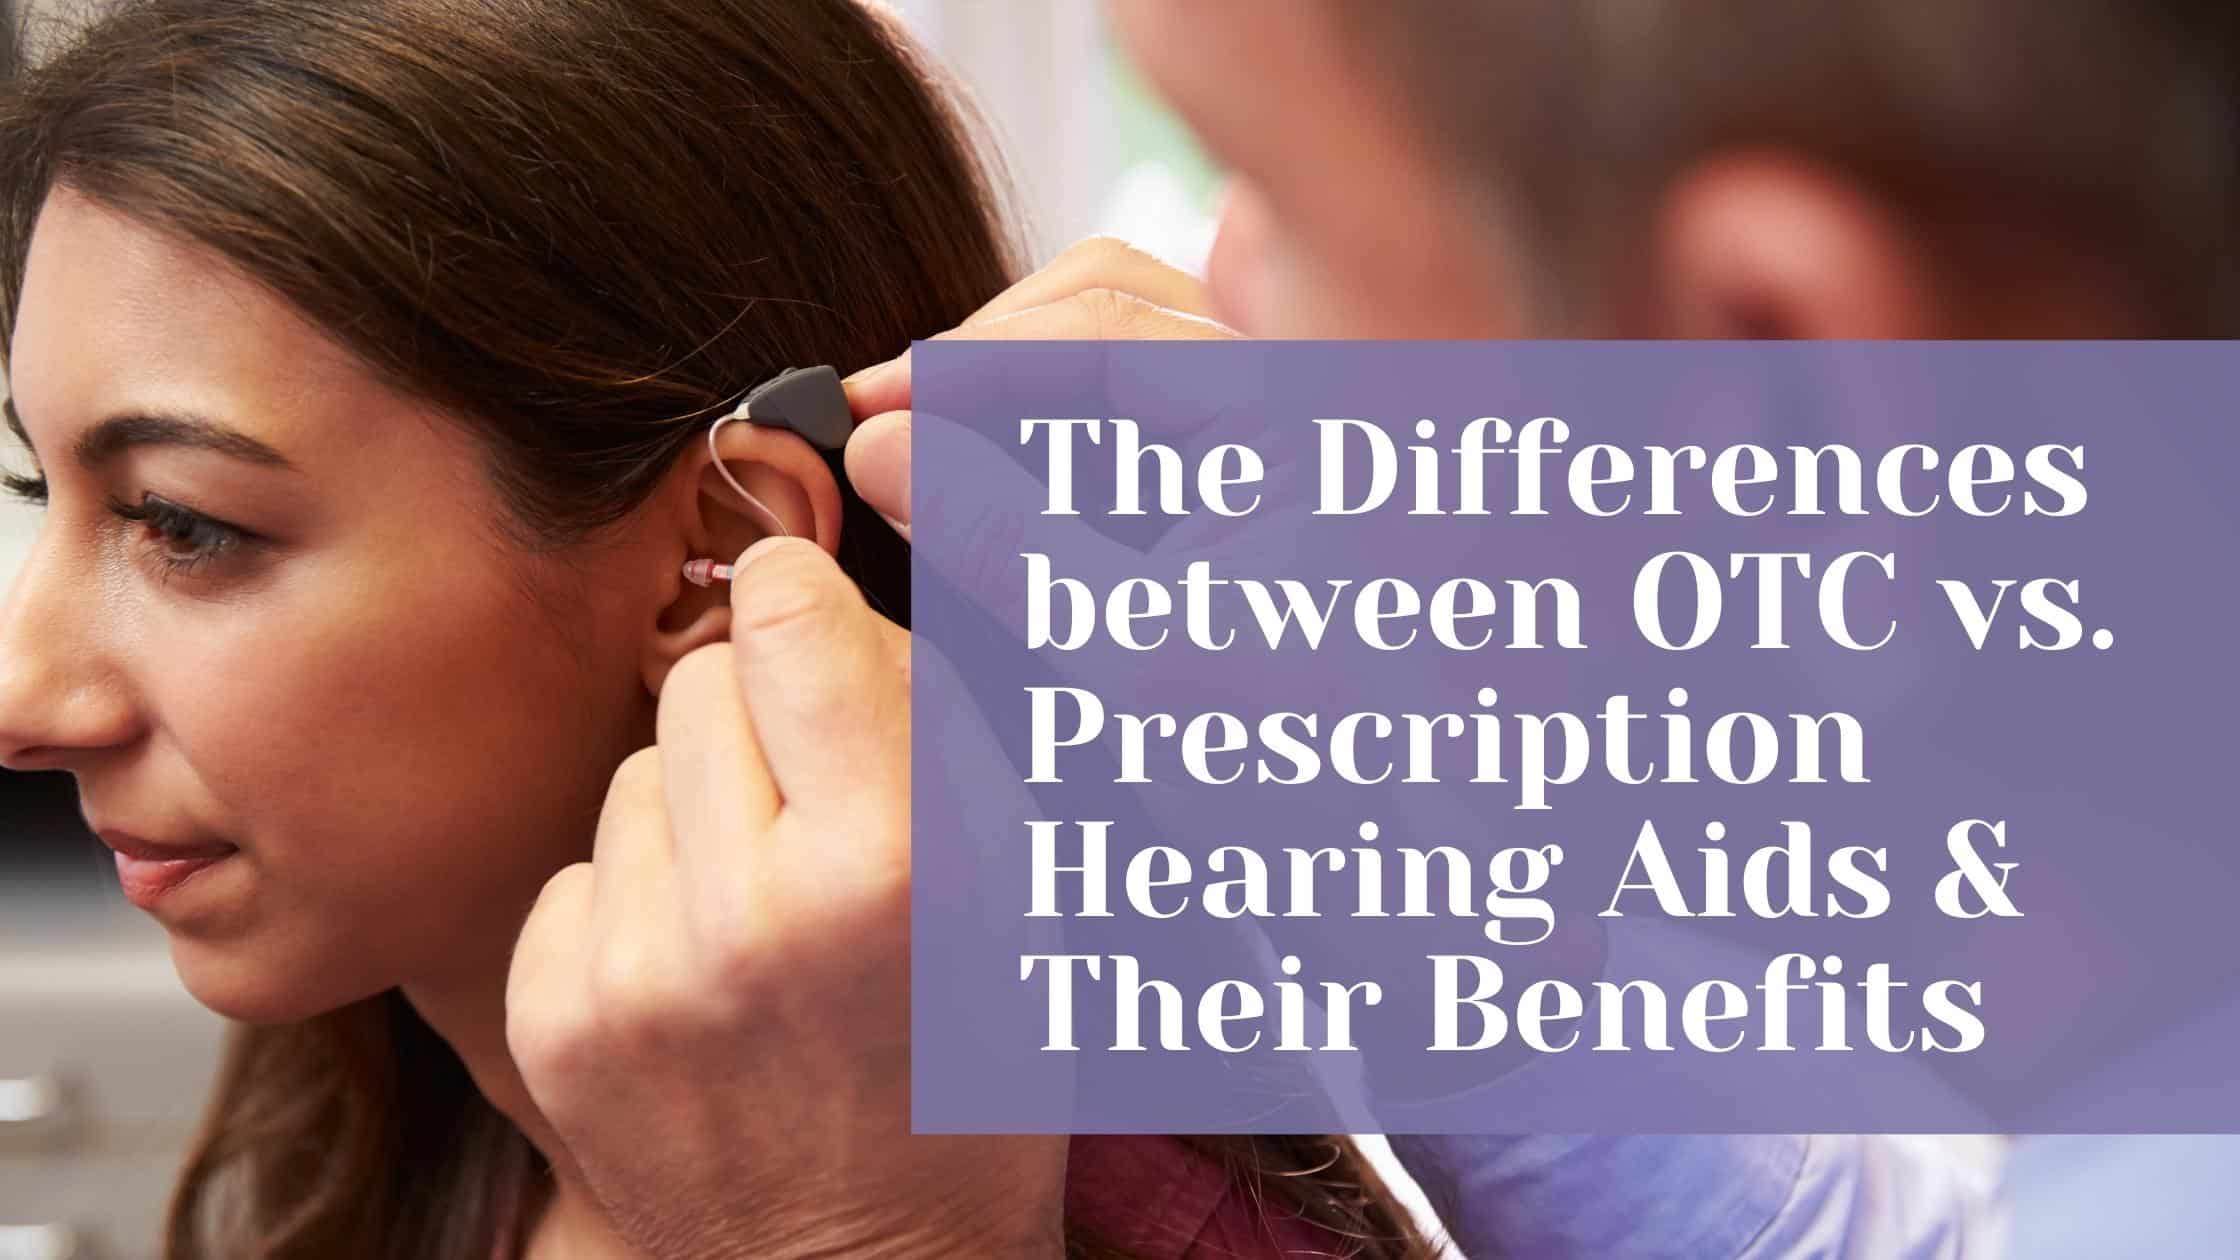 The Differences between OTC vs. Prescription Hearing Aids & Their Benefits